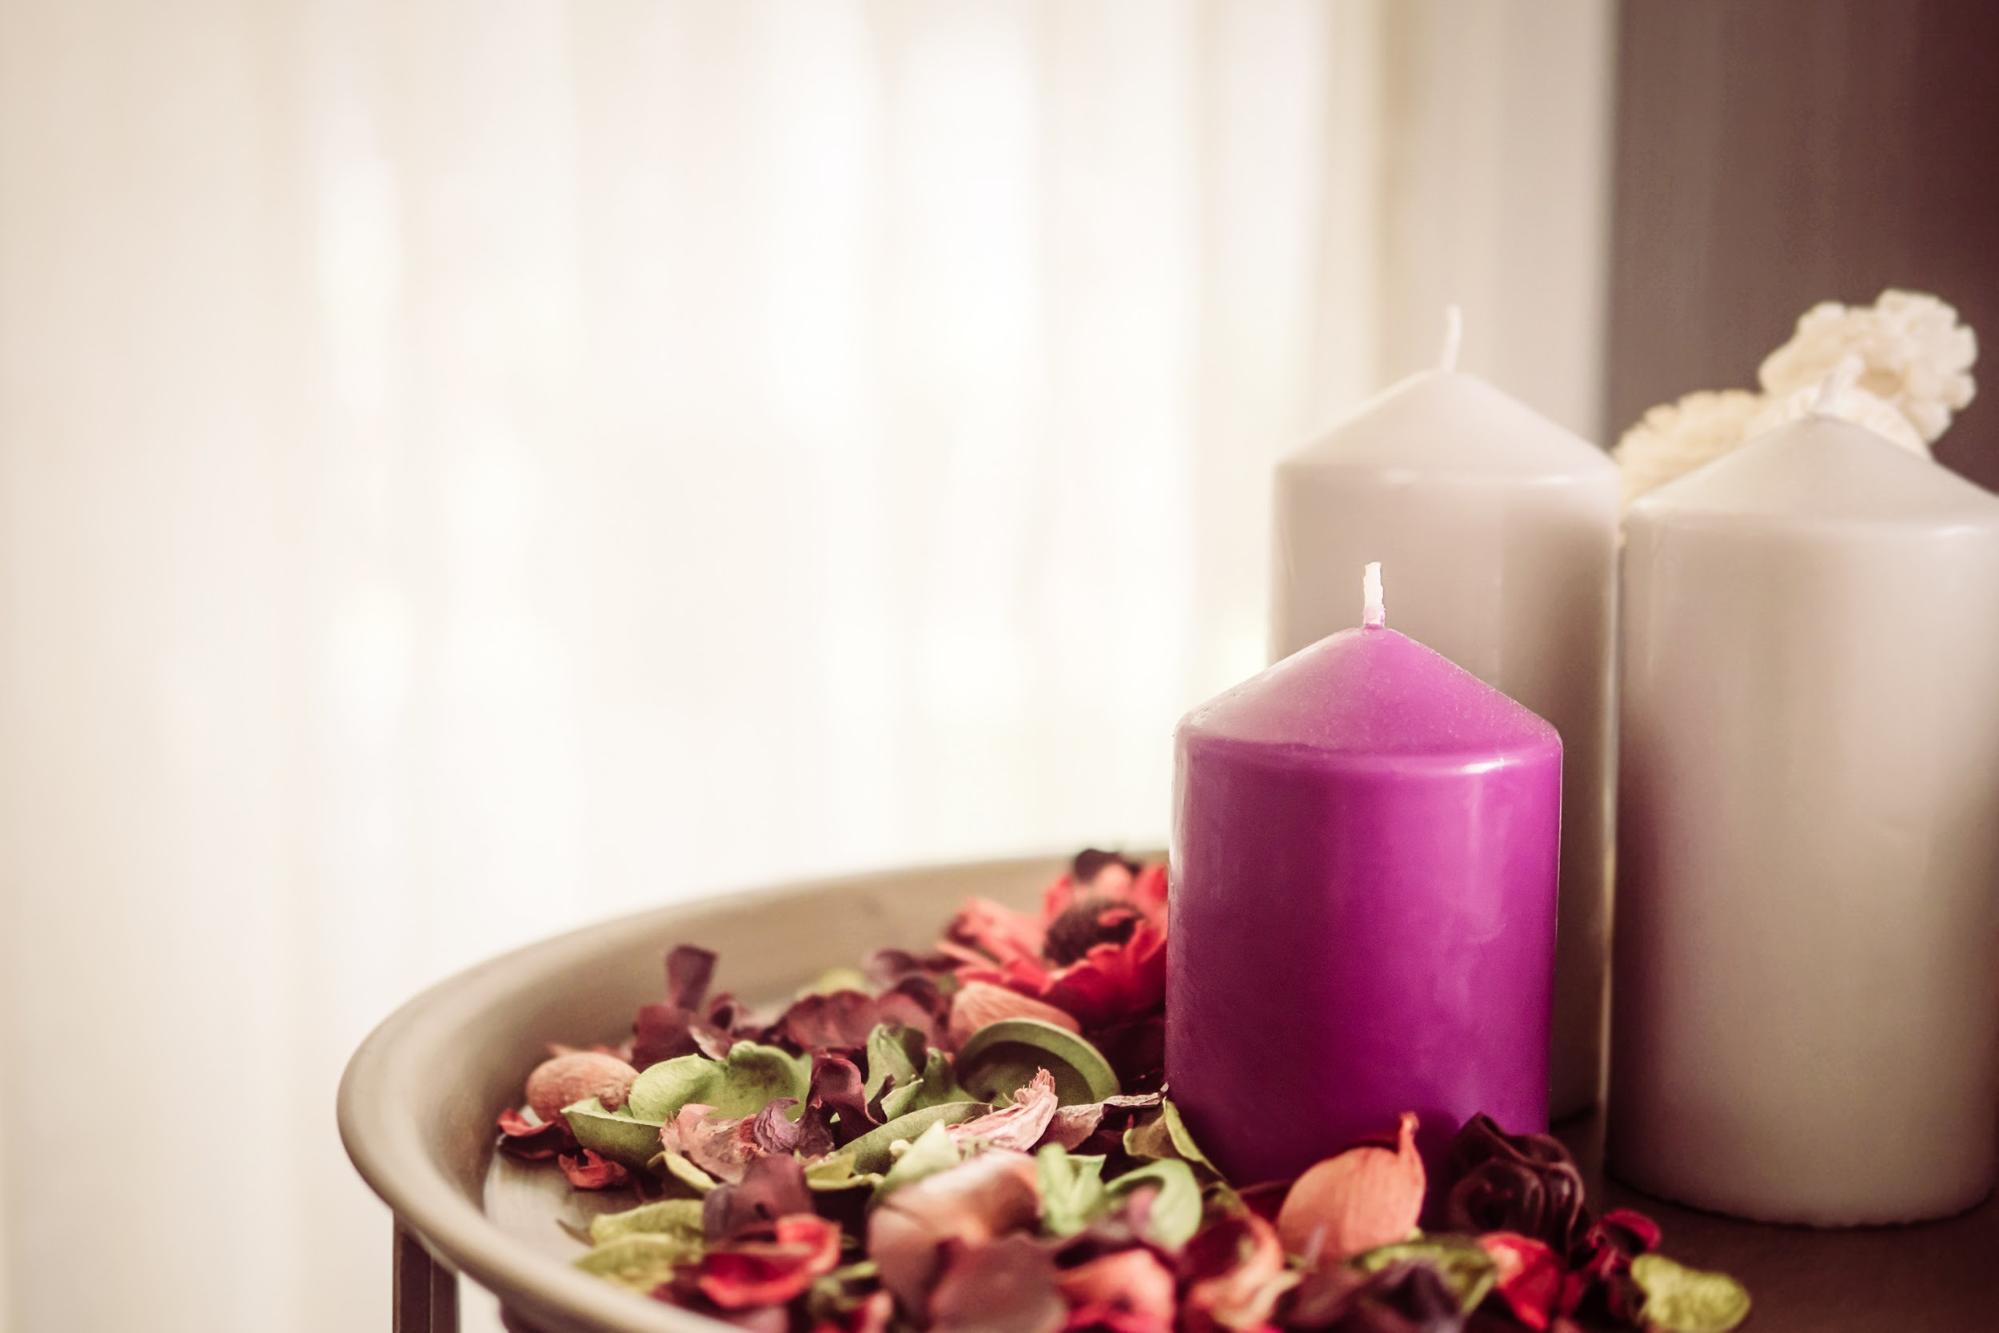 5 Ways Your Home Can Increase Your Happiness including sweet smelling candles